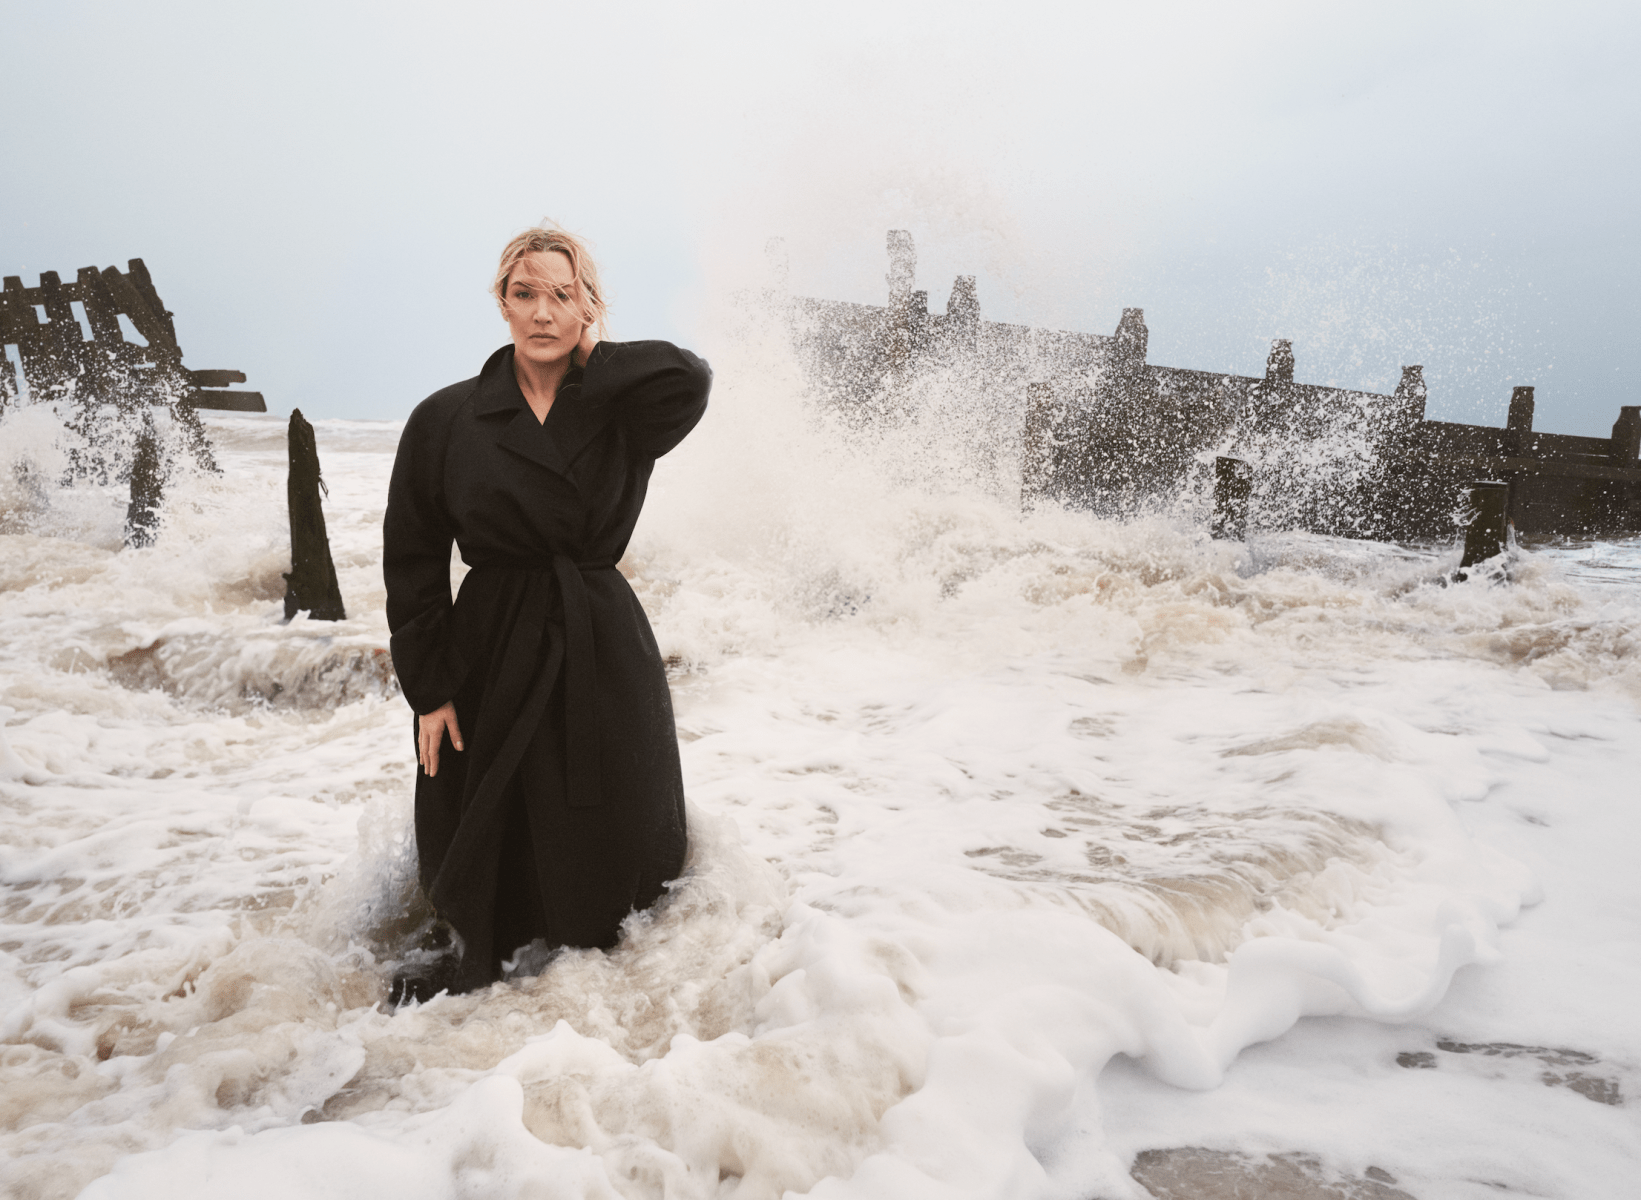 "This is Kate Winslet standing in the ocean, and it’s definitely one of my favorite pictures from the last couple of years. We’re not a long way from where she lives, and we went for a walk down the beach. It was very much her idea. I wanted to get her in the sea, but I’d imagined a long sandy beach, nothing like this violent and powerful scene. We both loved the fact that back in the day, this would have taken hundreds of assistants, fashion assistants, special effects crews, people would have brought extra wave machines to make sure it was wavy enough. But here we just did it. Her husband was helping me — I even had to borrow his wellies. Compositionally, she’s framed perfectly by the breakwaters, one-third across the frame."<br>